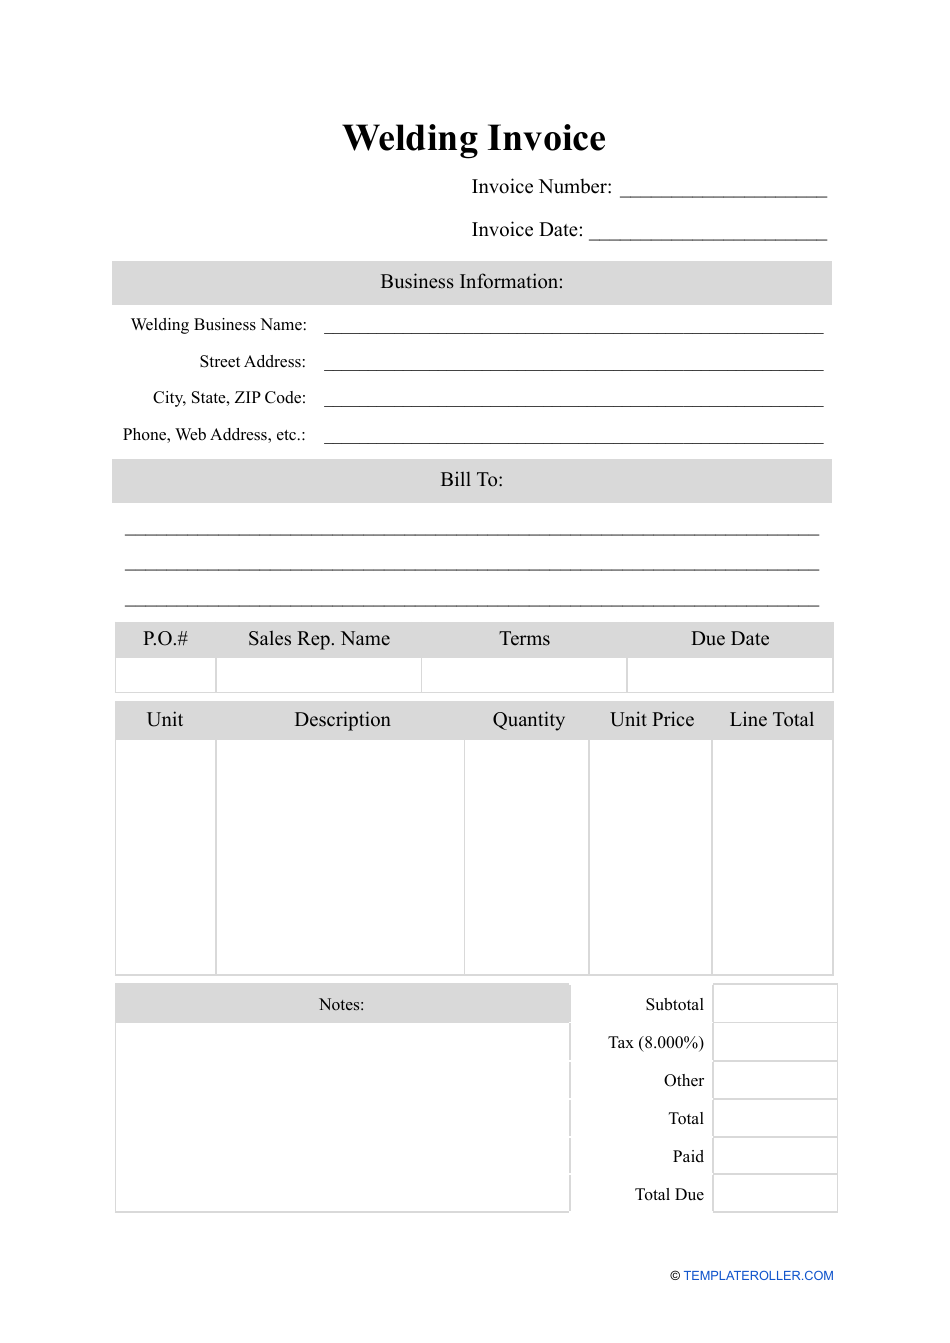 Welding Invoice Template, Page 1